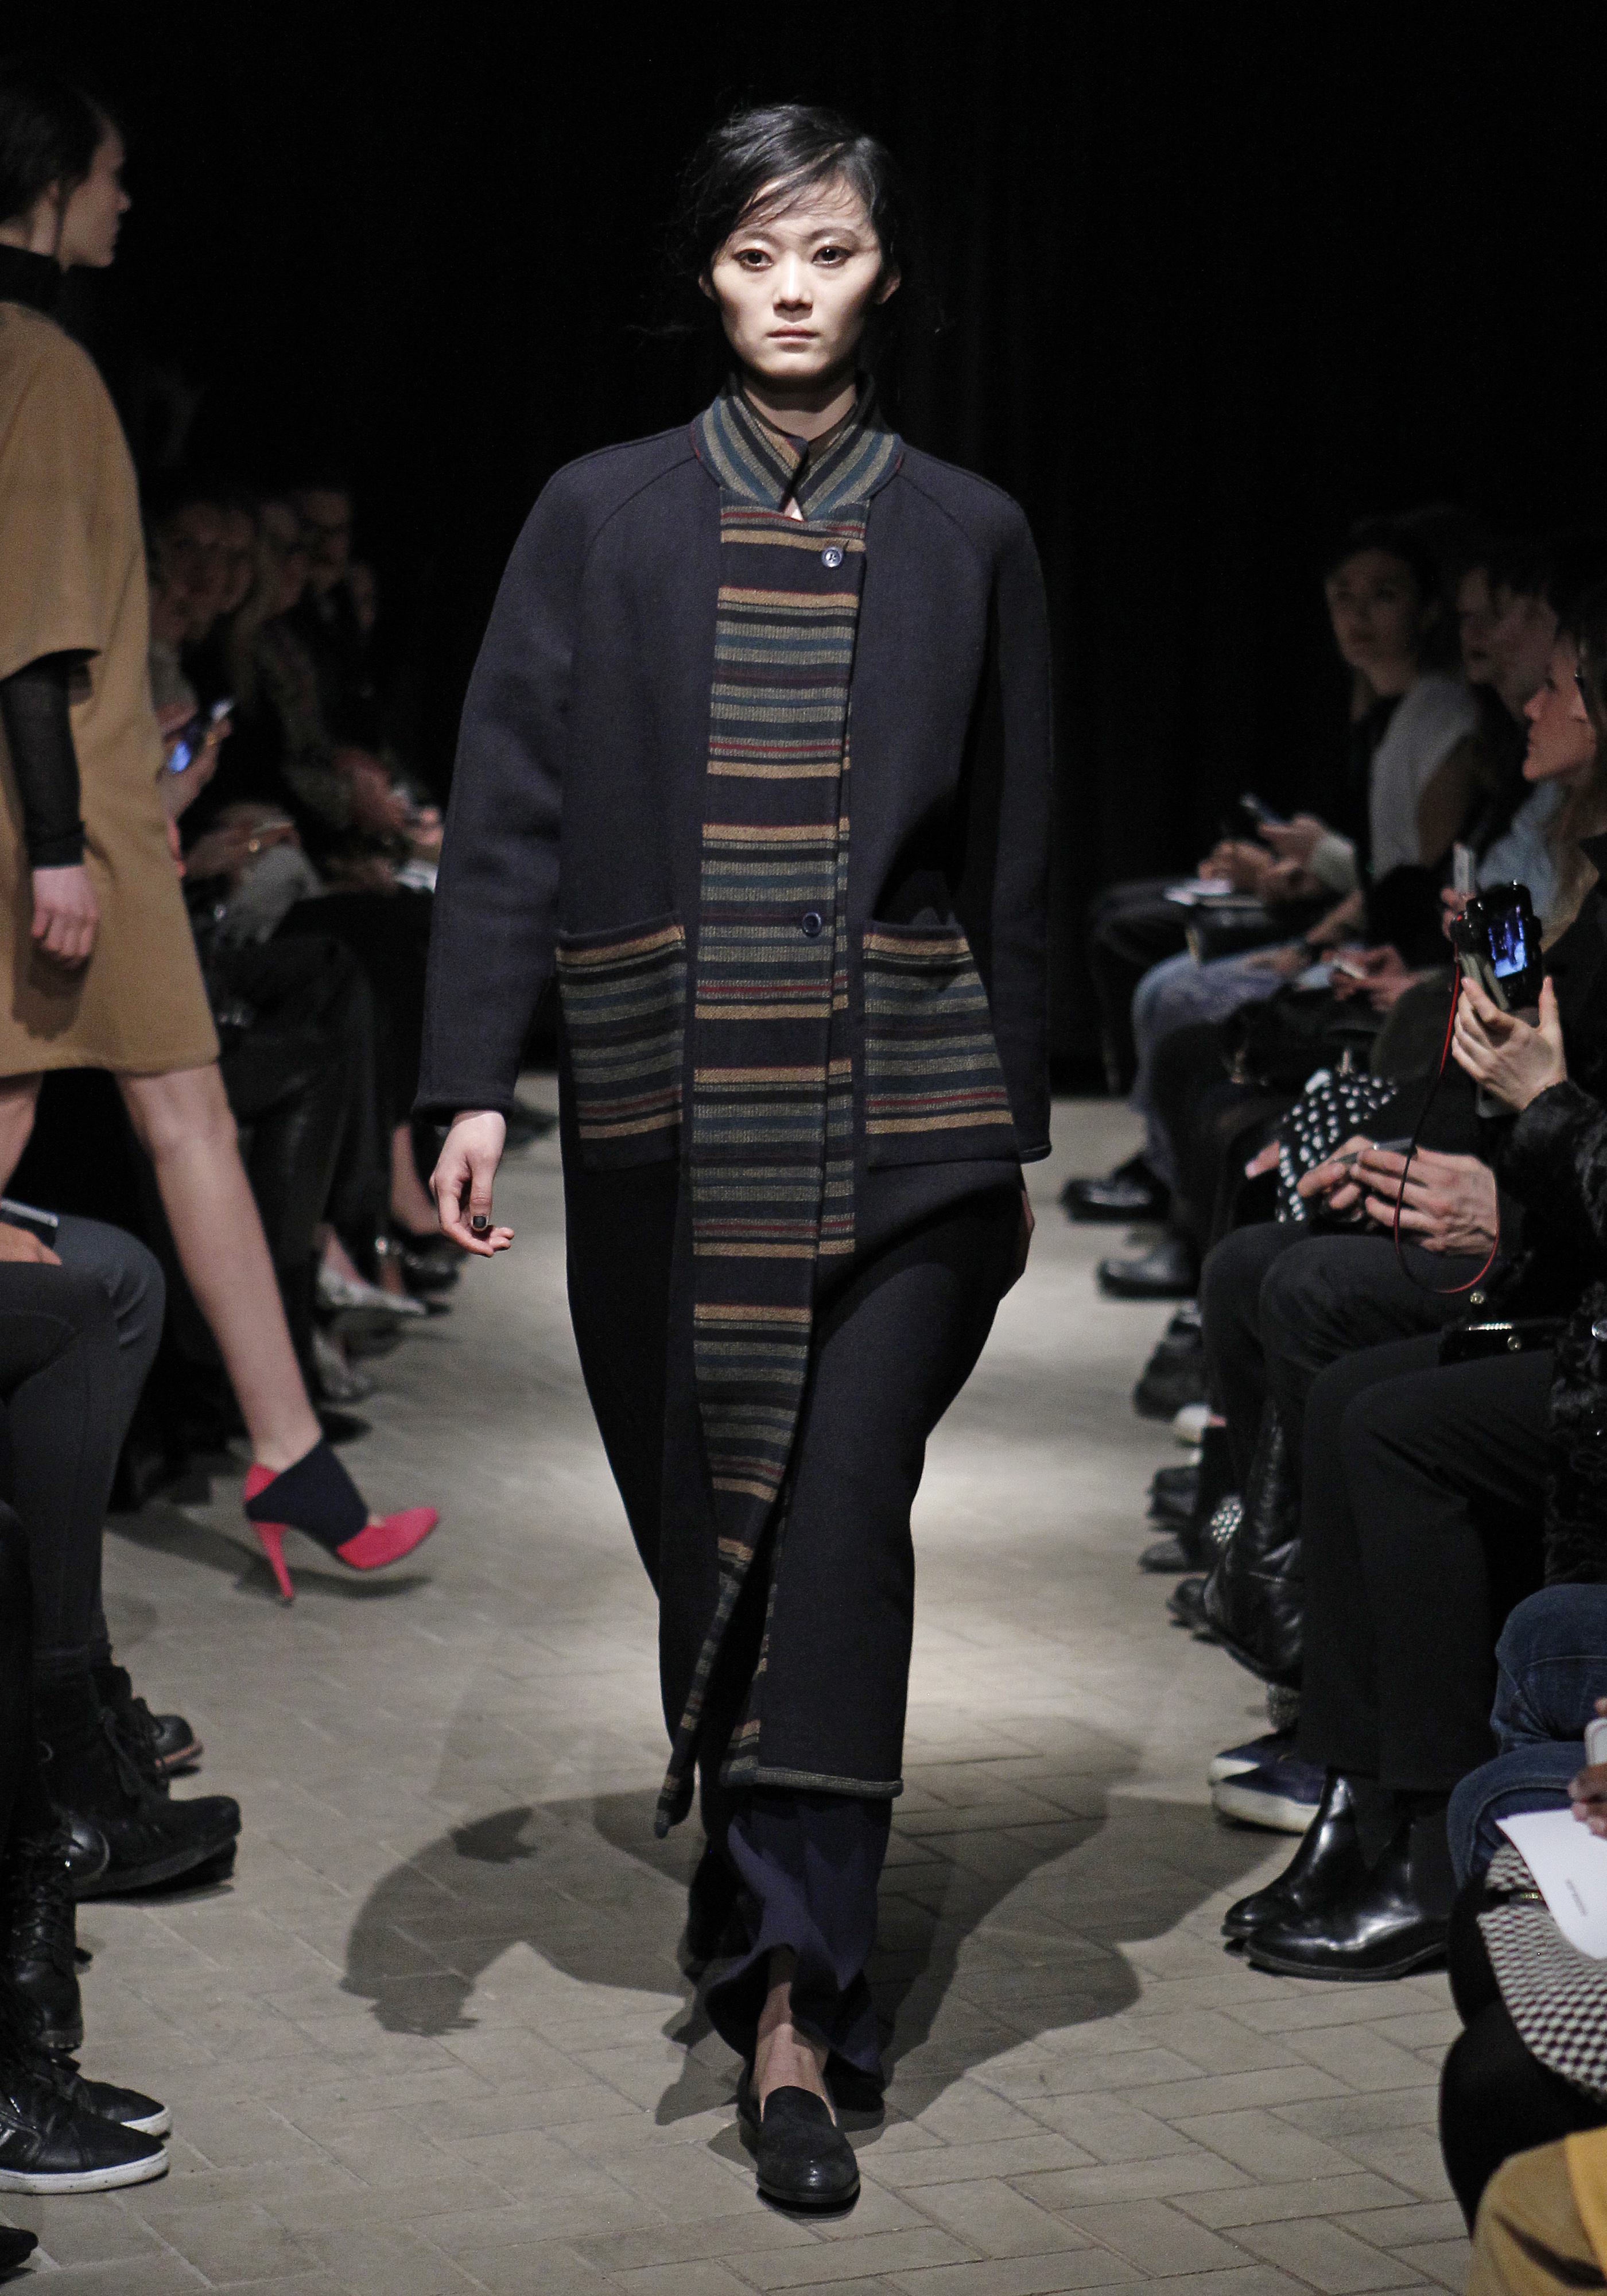 FW14 RODEBJER NEW YORK 02/06/2014